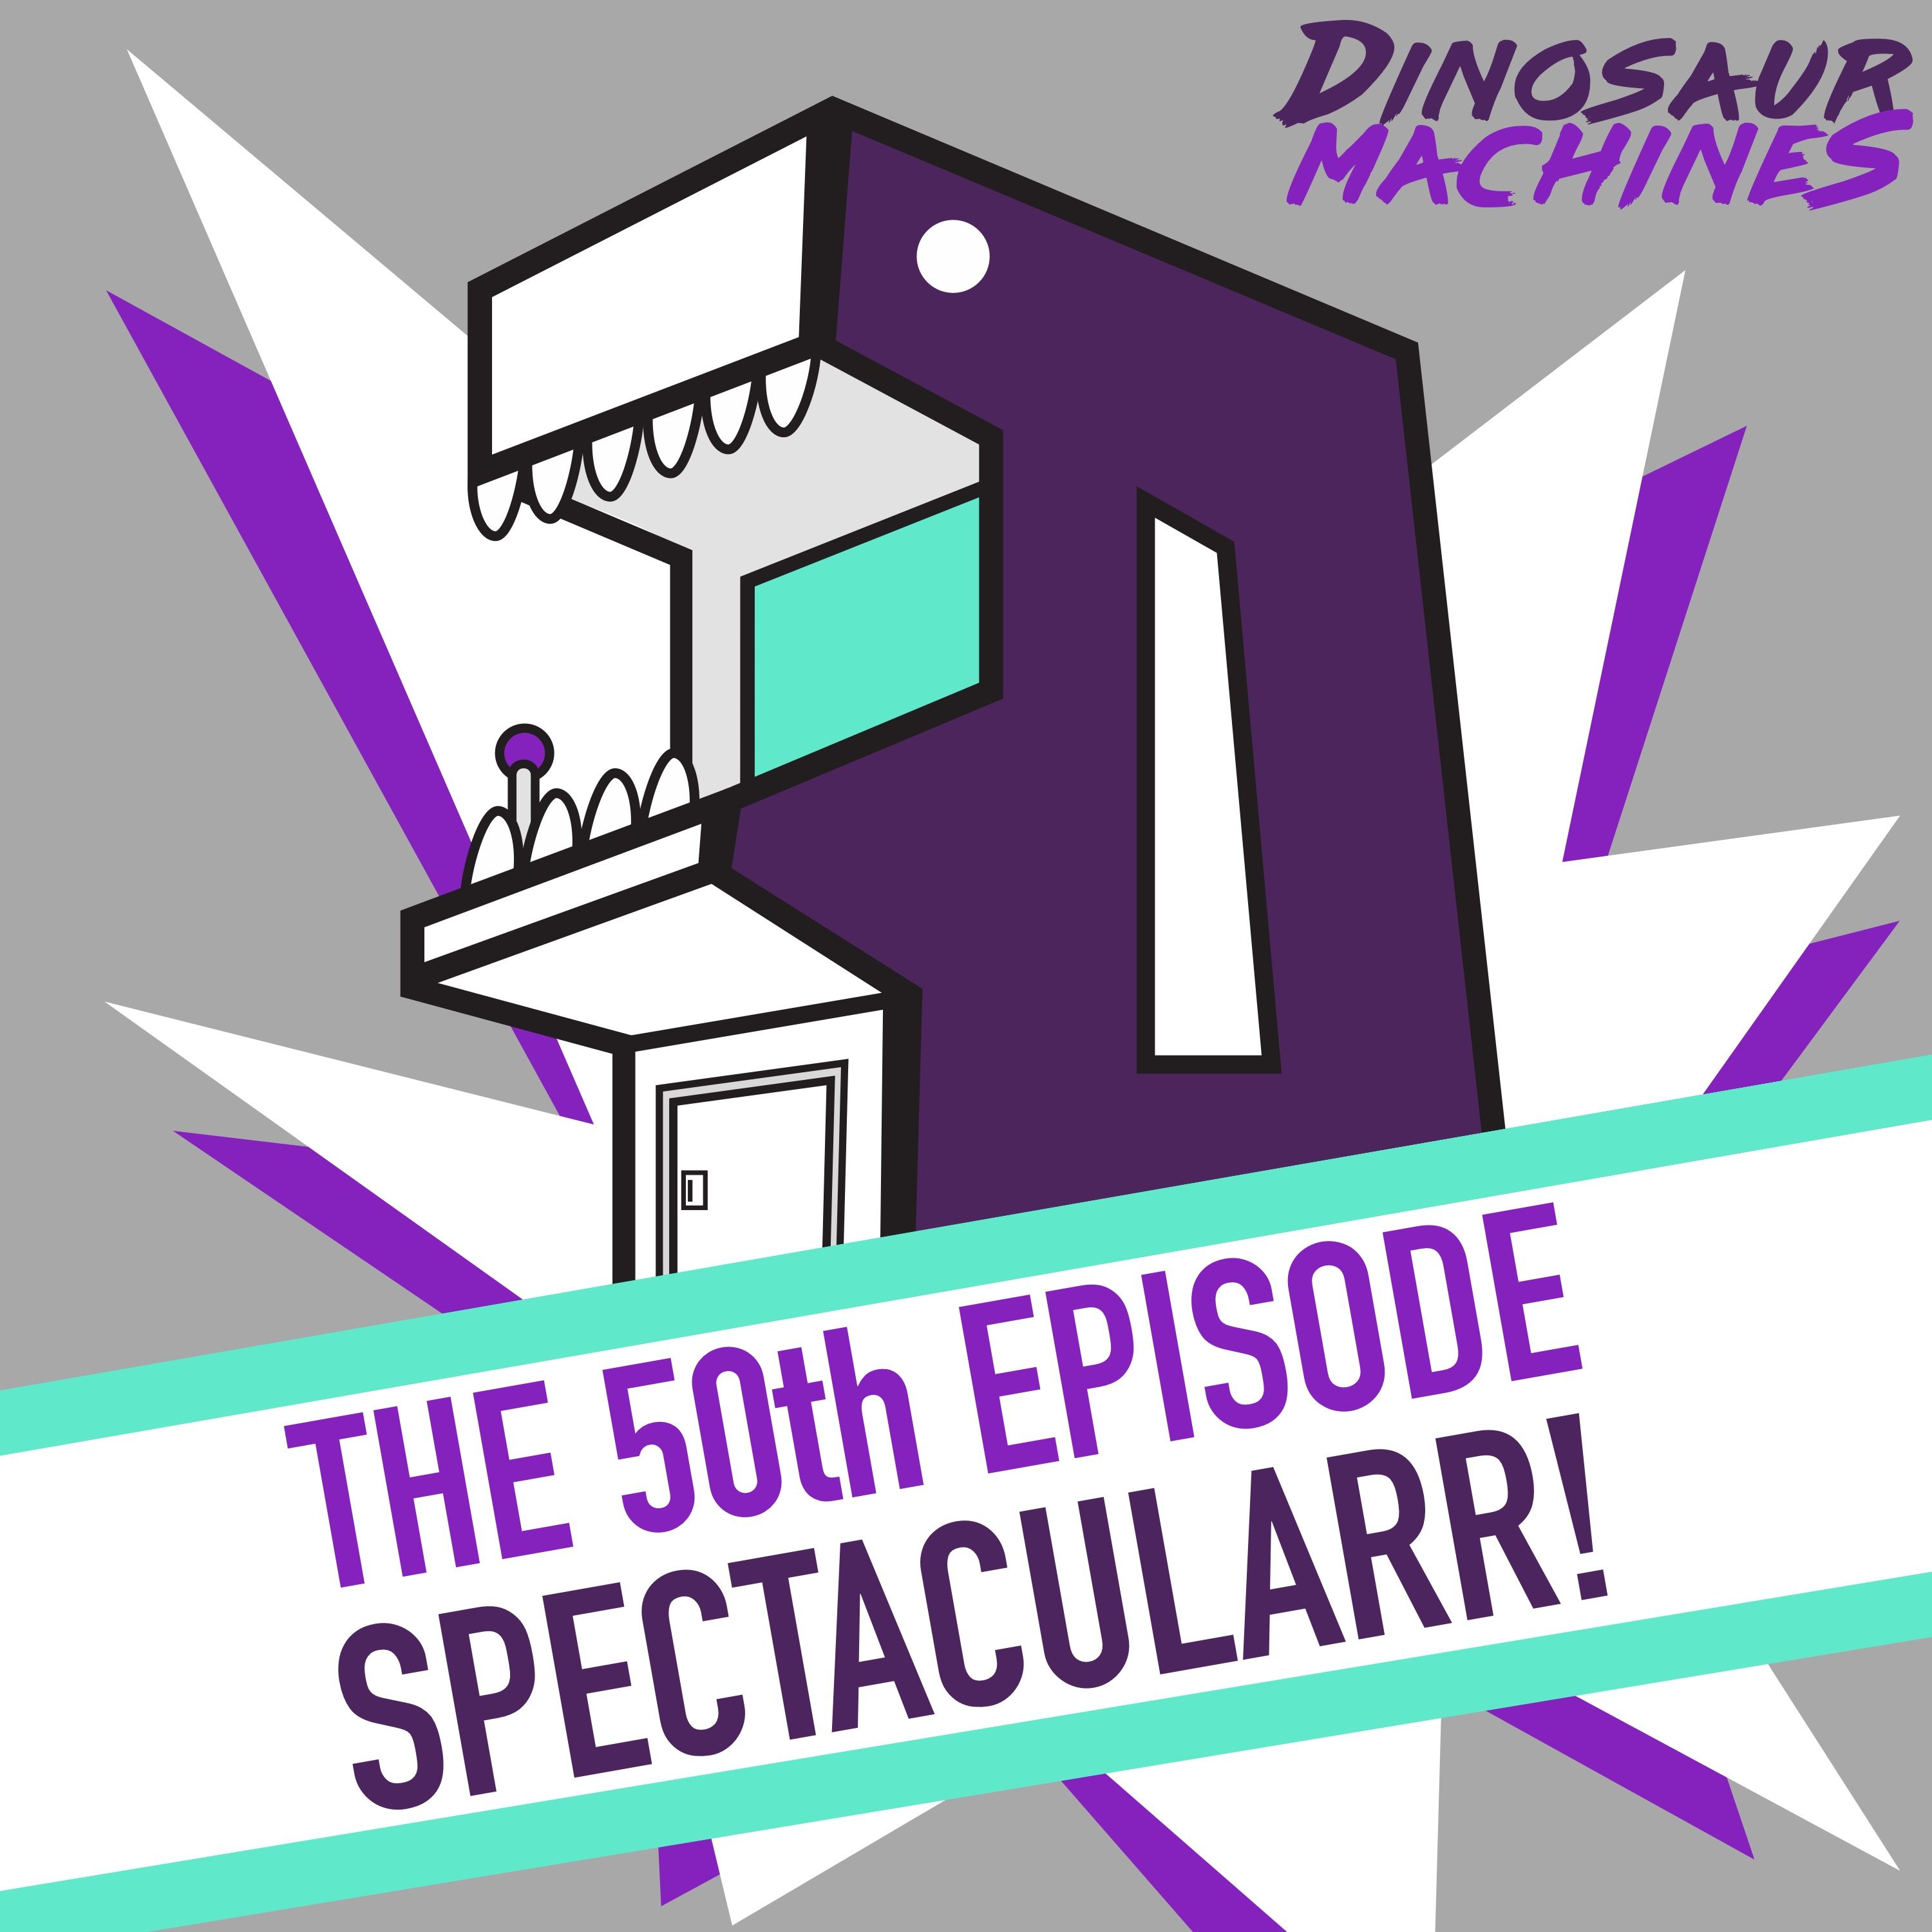 The 50th Episode Spectacularr!